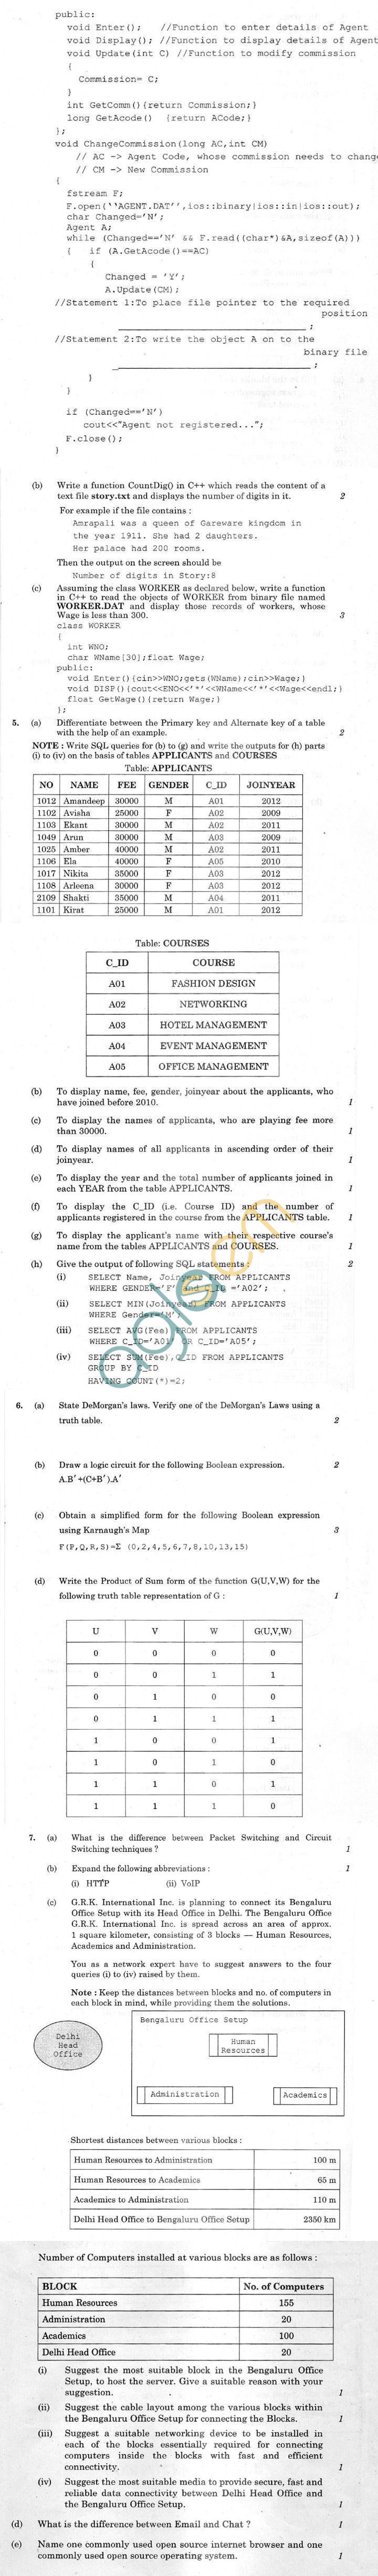 CBSE Compartment Exam 2013 Class XII Question Paper - Computer Science